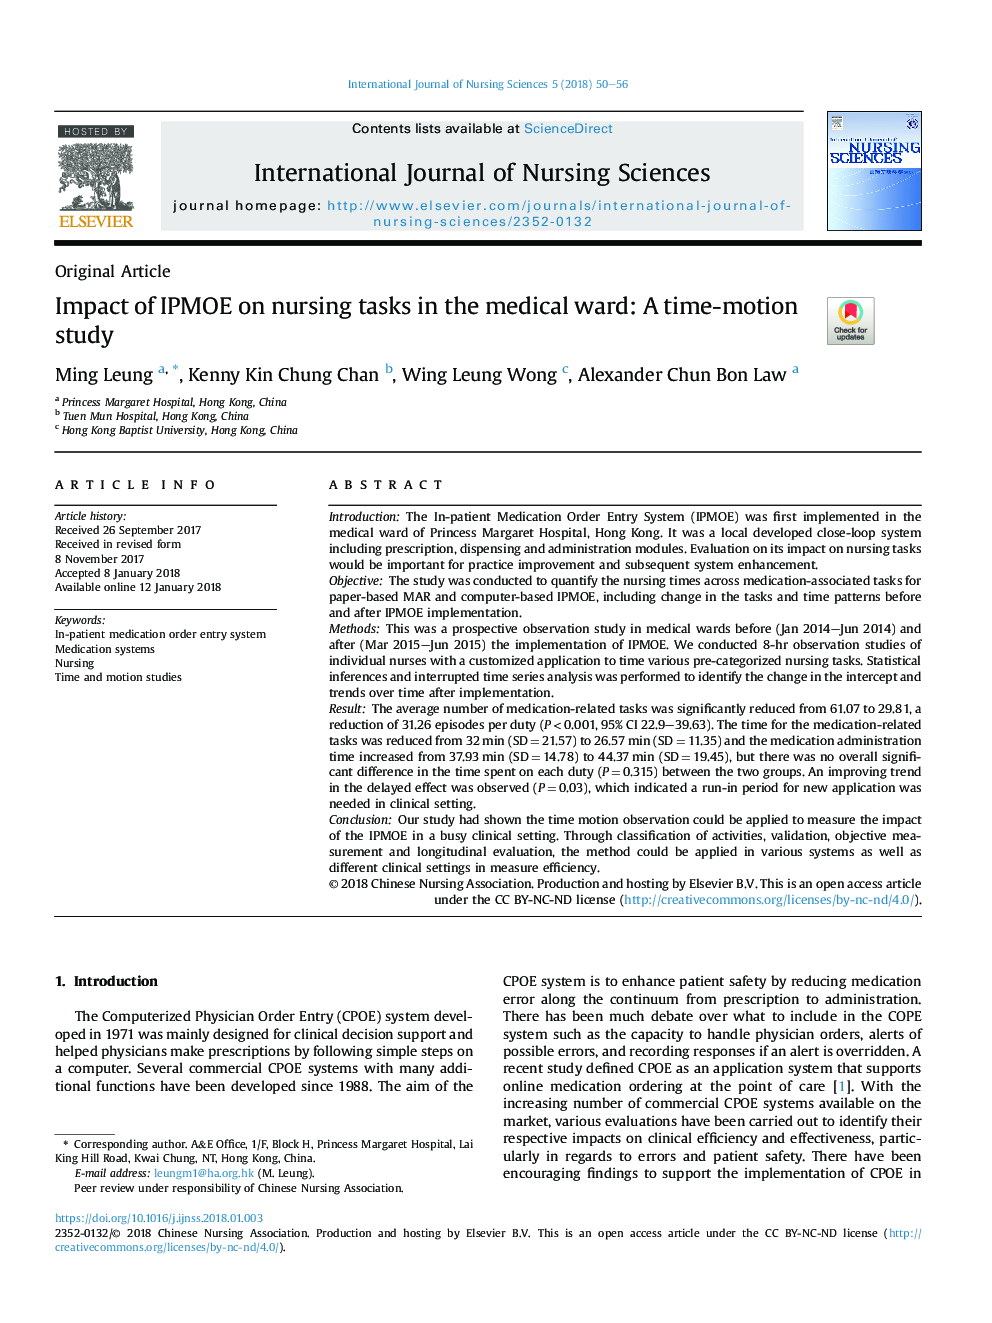 Impact of IPMOE on nursing tasks in the medical ward: A time-motion study